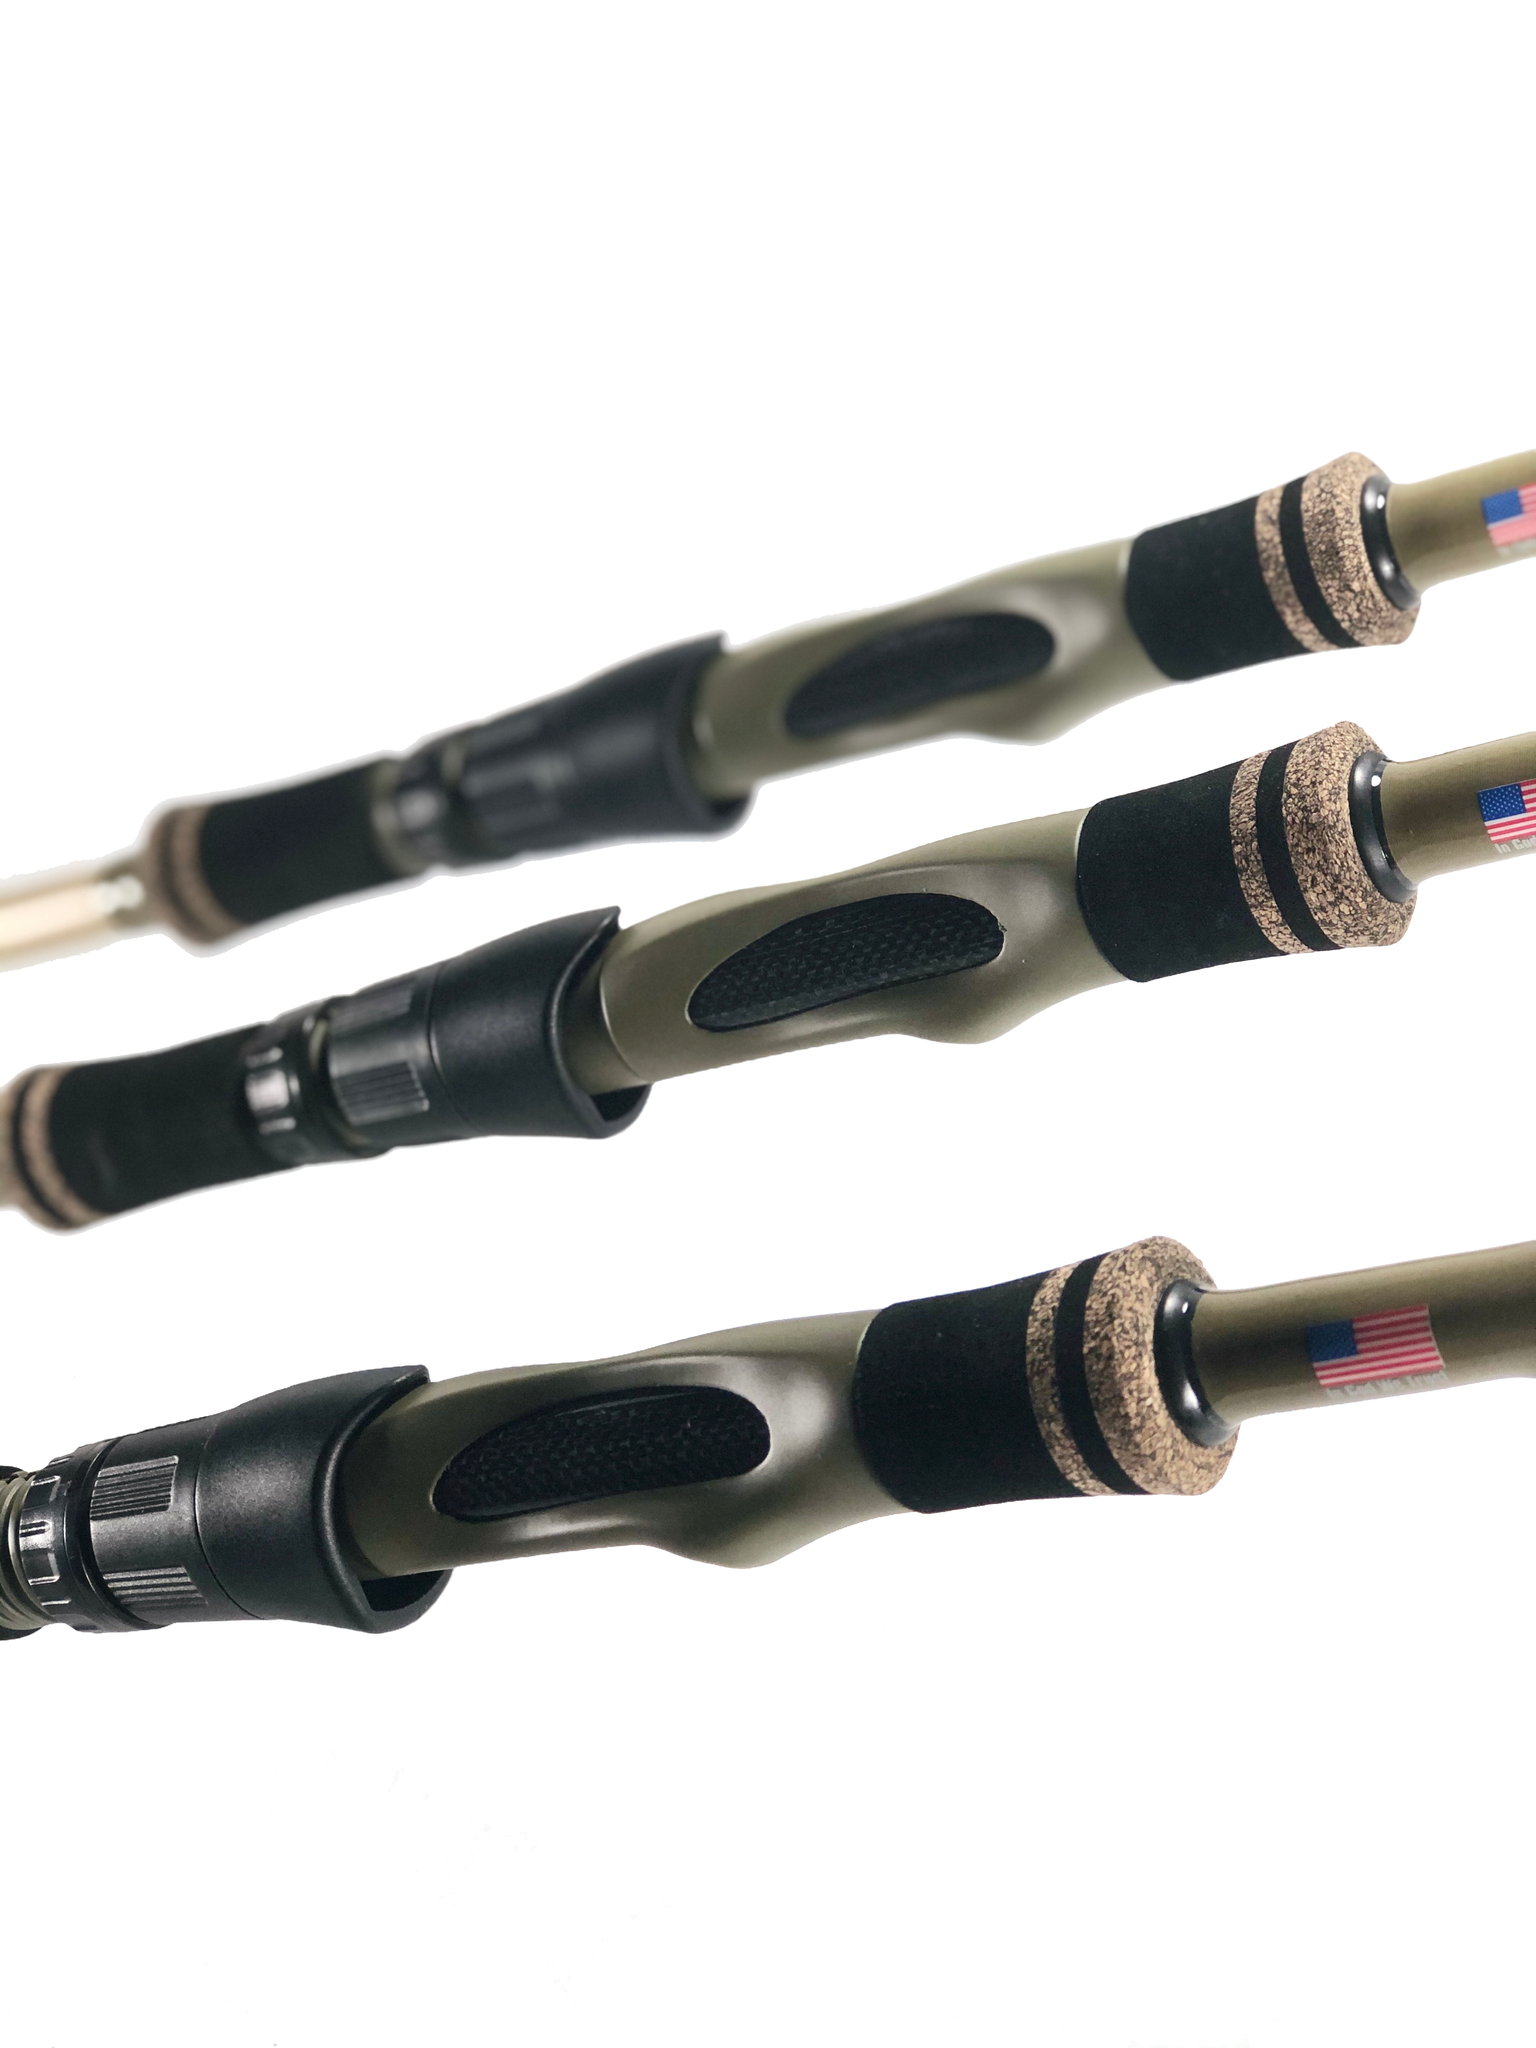 Brute Force Boat Rod Offshore rod – Bull Bay Tackle Company